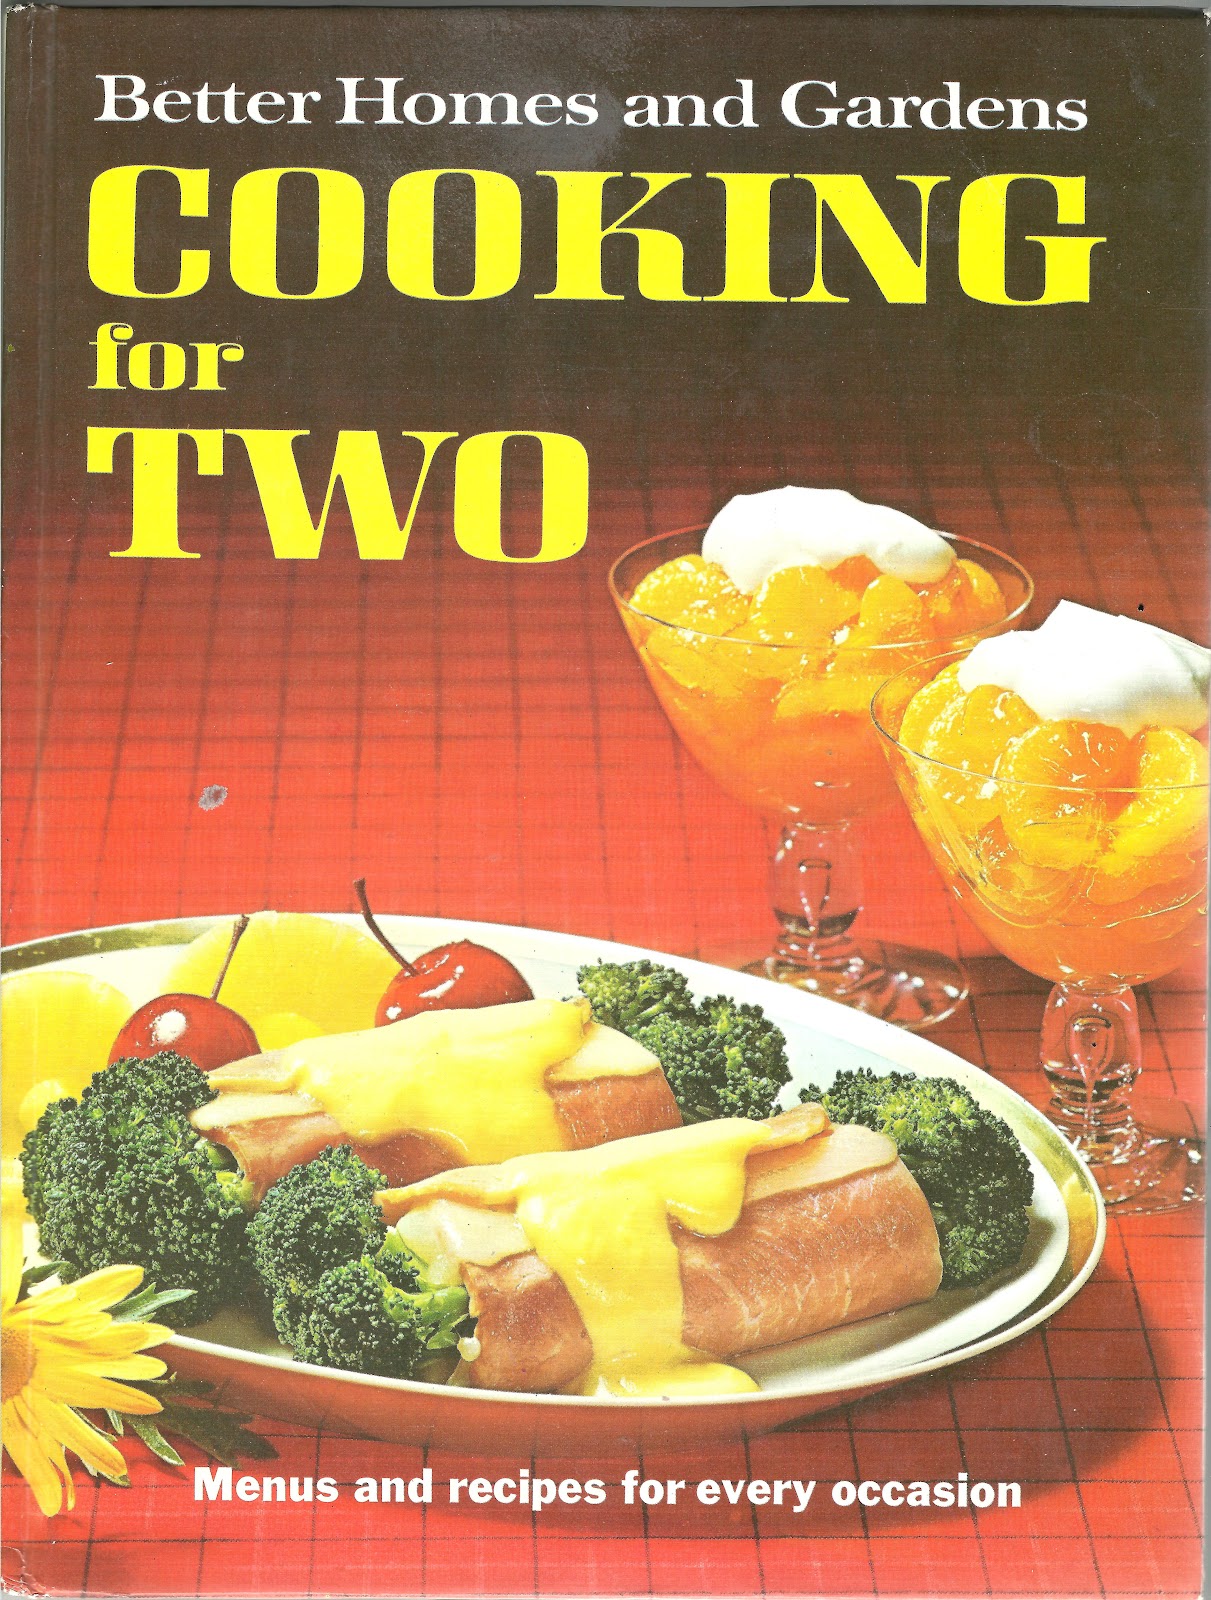 Better Homes And Gardens Cook Books 1968 75 Fonts In Use